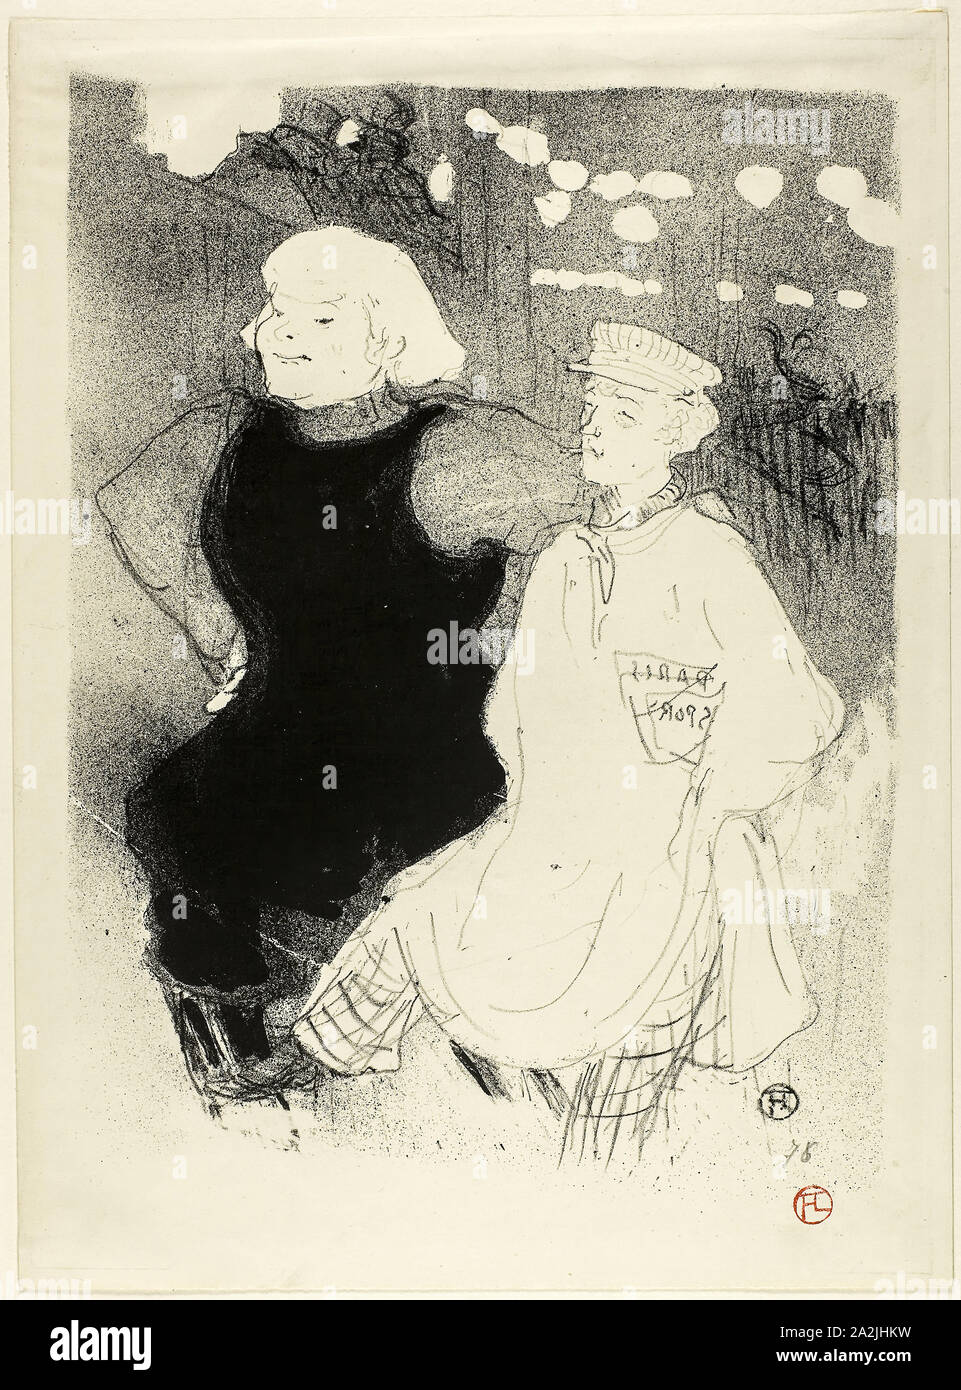 At the Moulin Rouge: the Franco-Russian Alliance, 1893, published 1894, Henri de Toulouse-Lautrec, French, 1864-1901, France, Lithograph on cream wove paper, 344 × 250 mm (image), 380 × 280.5 mm (sheet Stock Photo